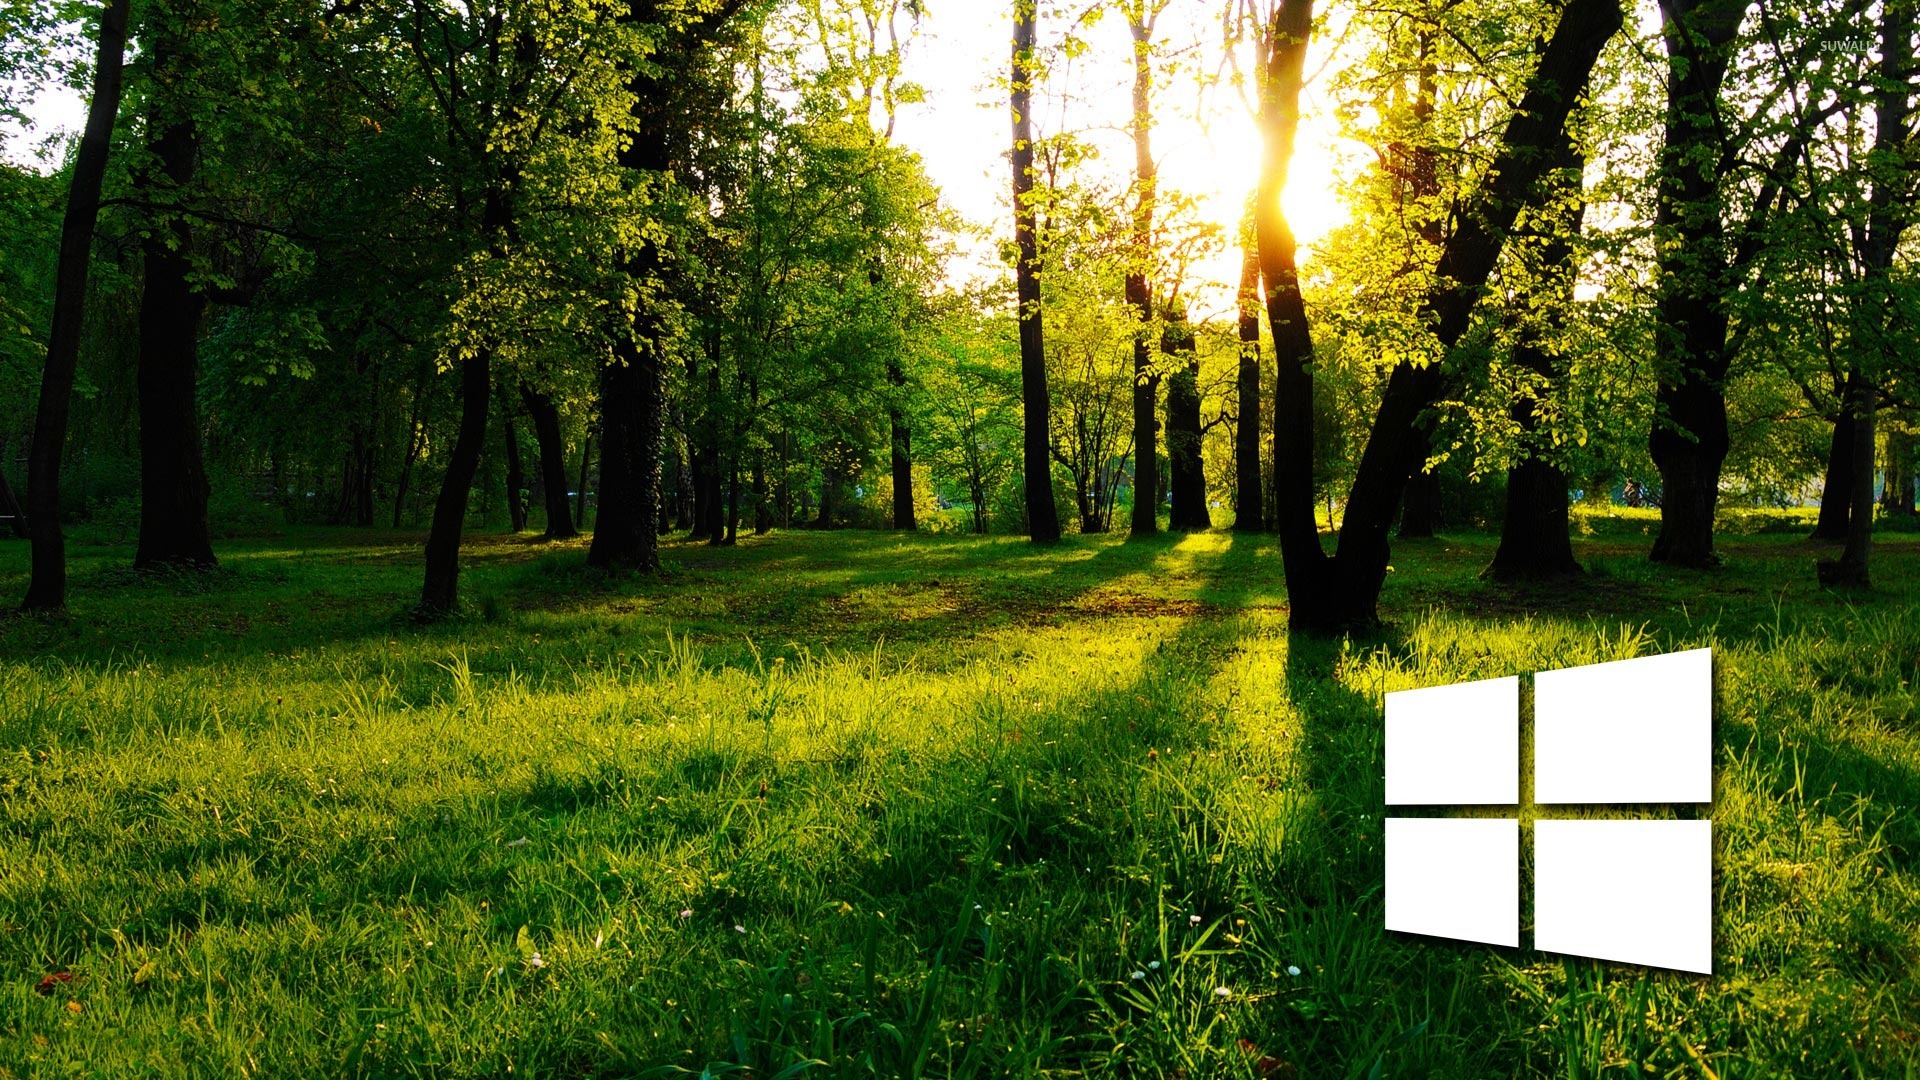 Windows 10 in the green forest simple logo wallpaper - Computer ...